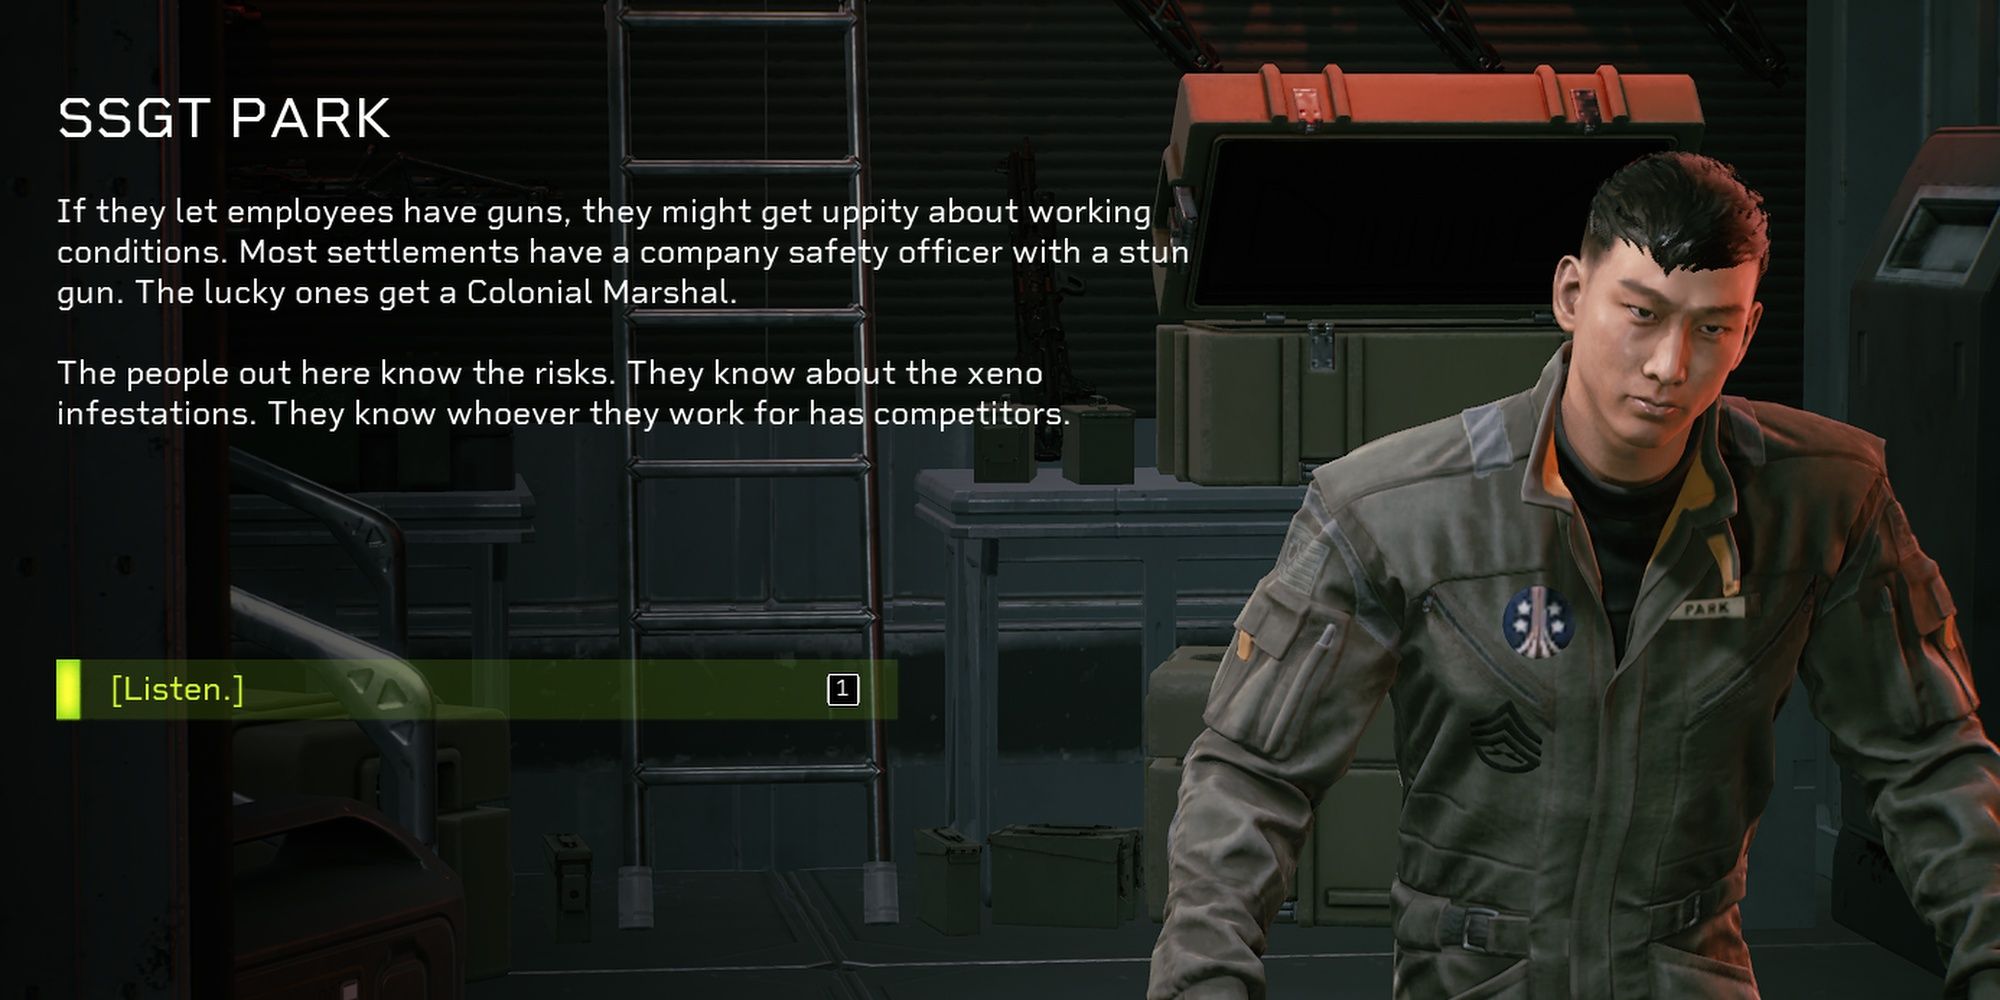 Aliens: Fireteam Elite Requisitions Officer Discussing Working Conditions